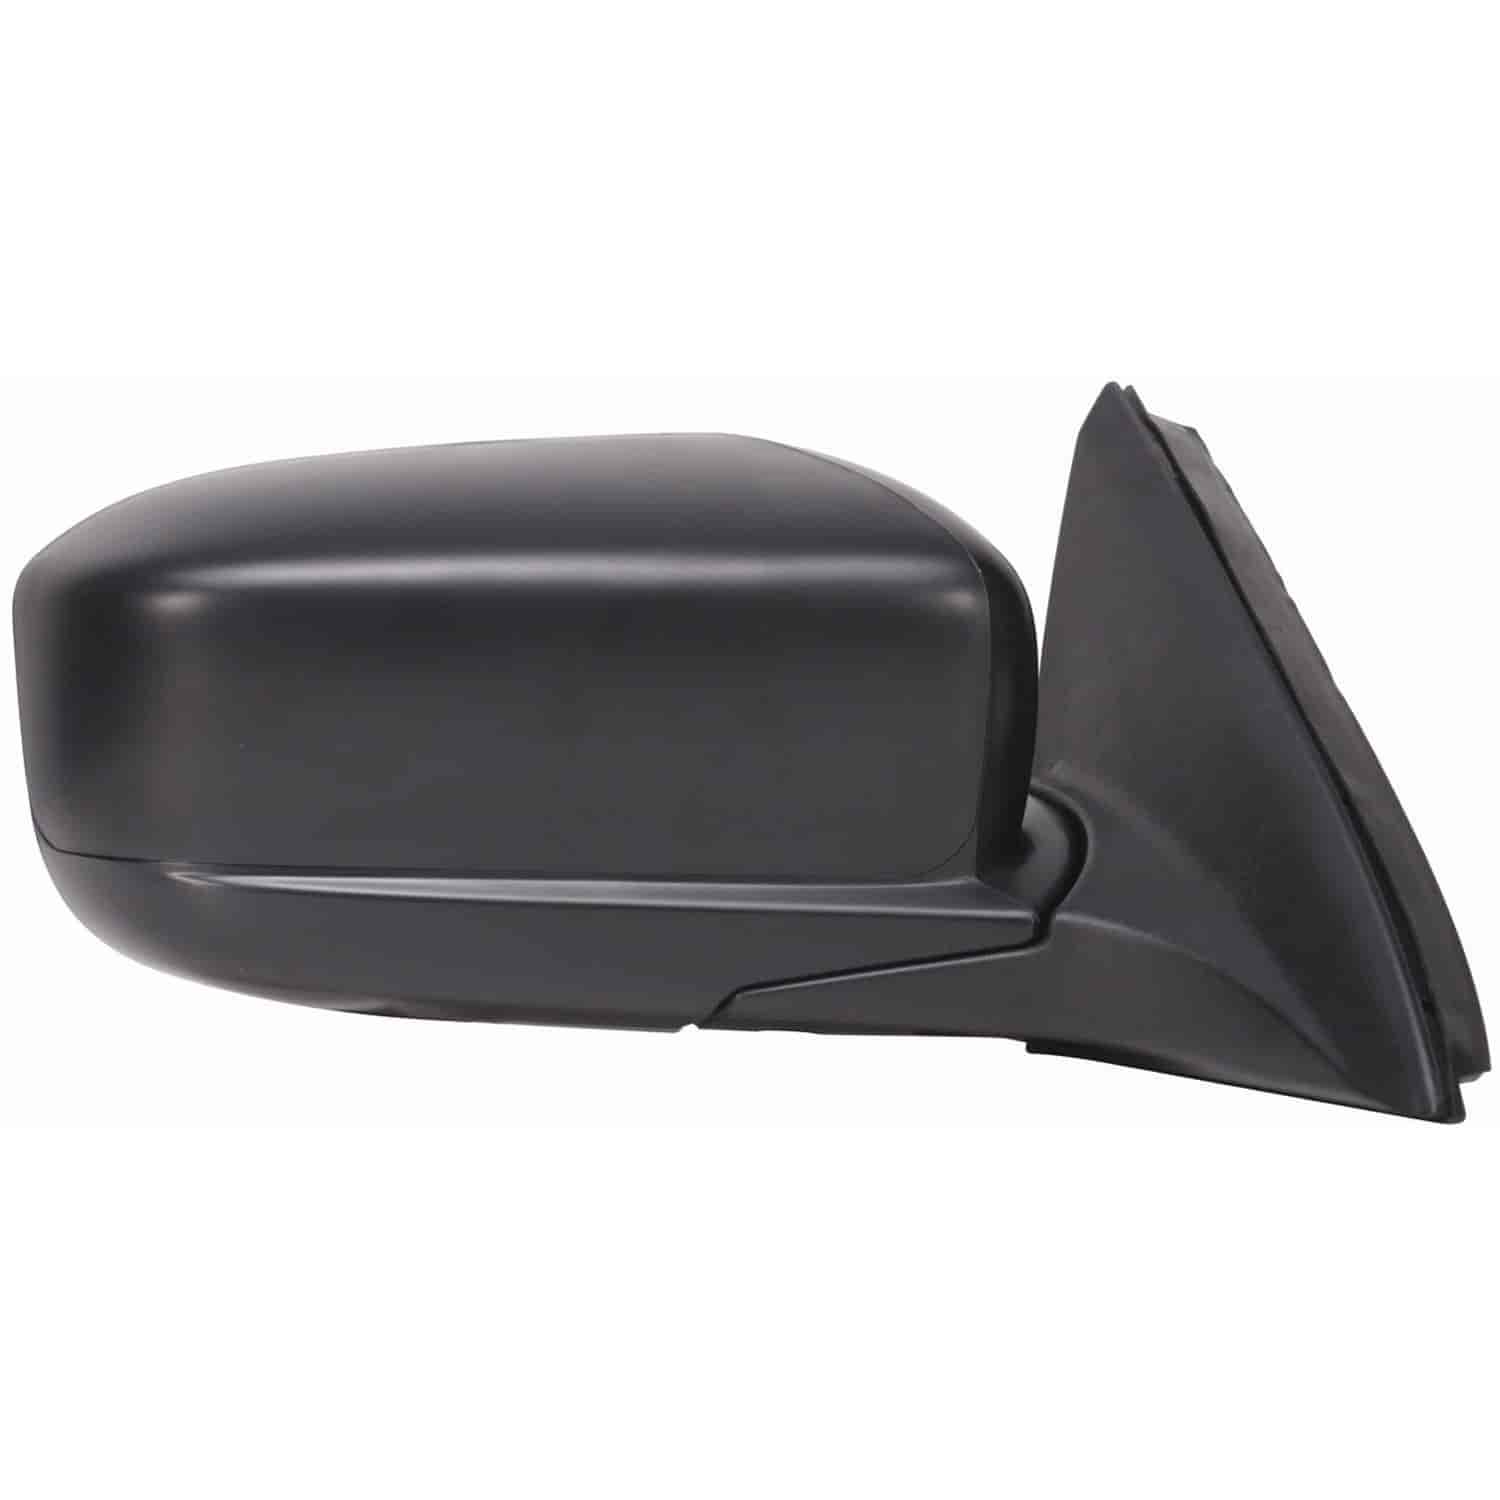 OEM Style Replacement mirror for 03-07 Honda Accord Sedan passenger side mirror tested to fit and fu